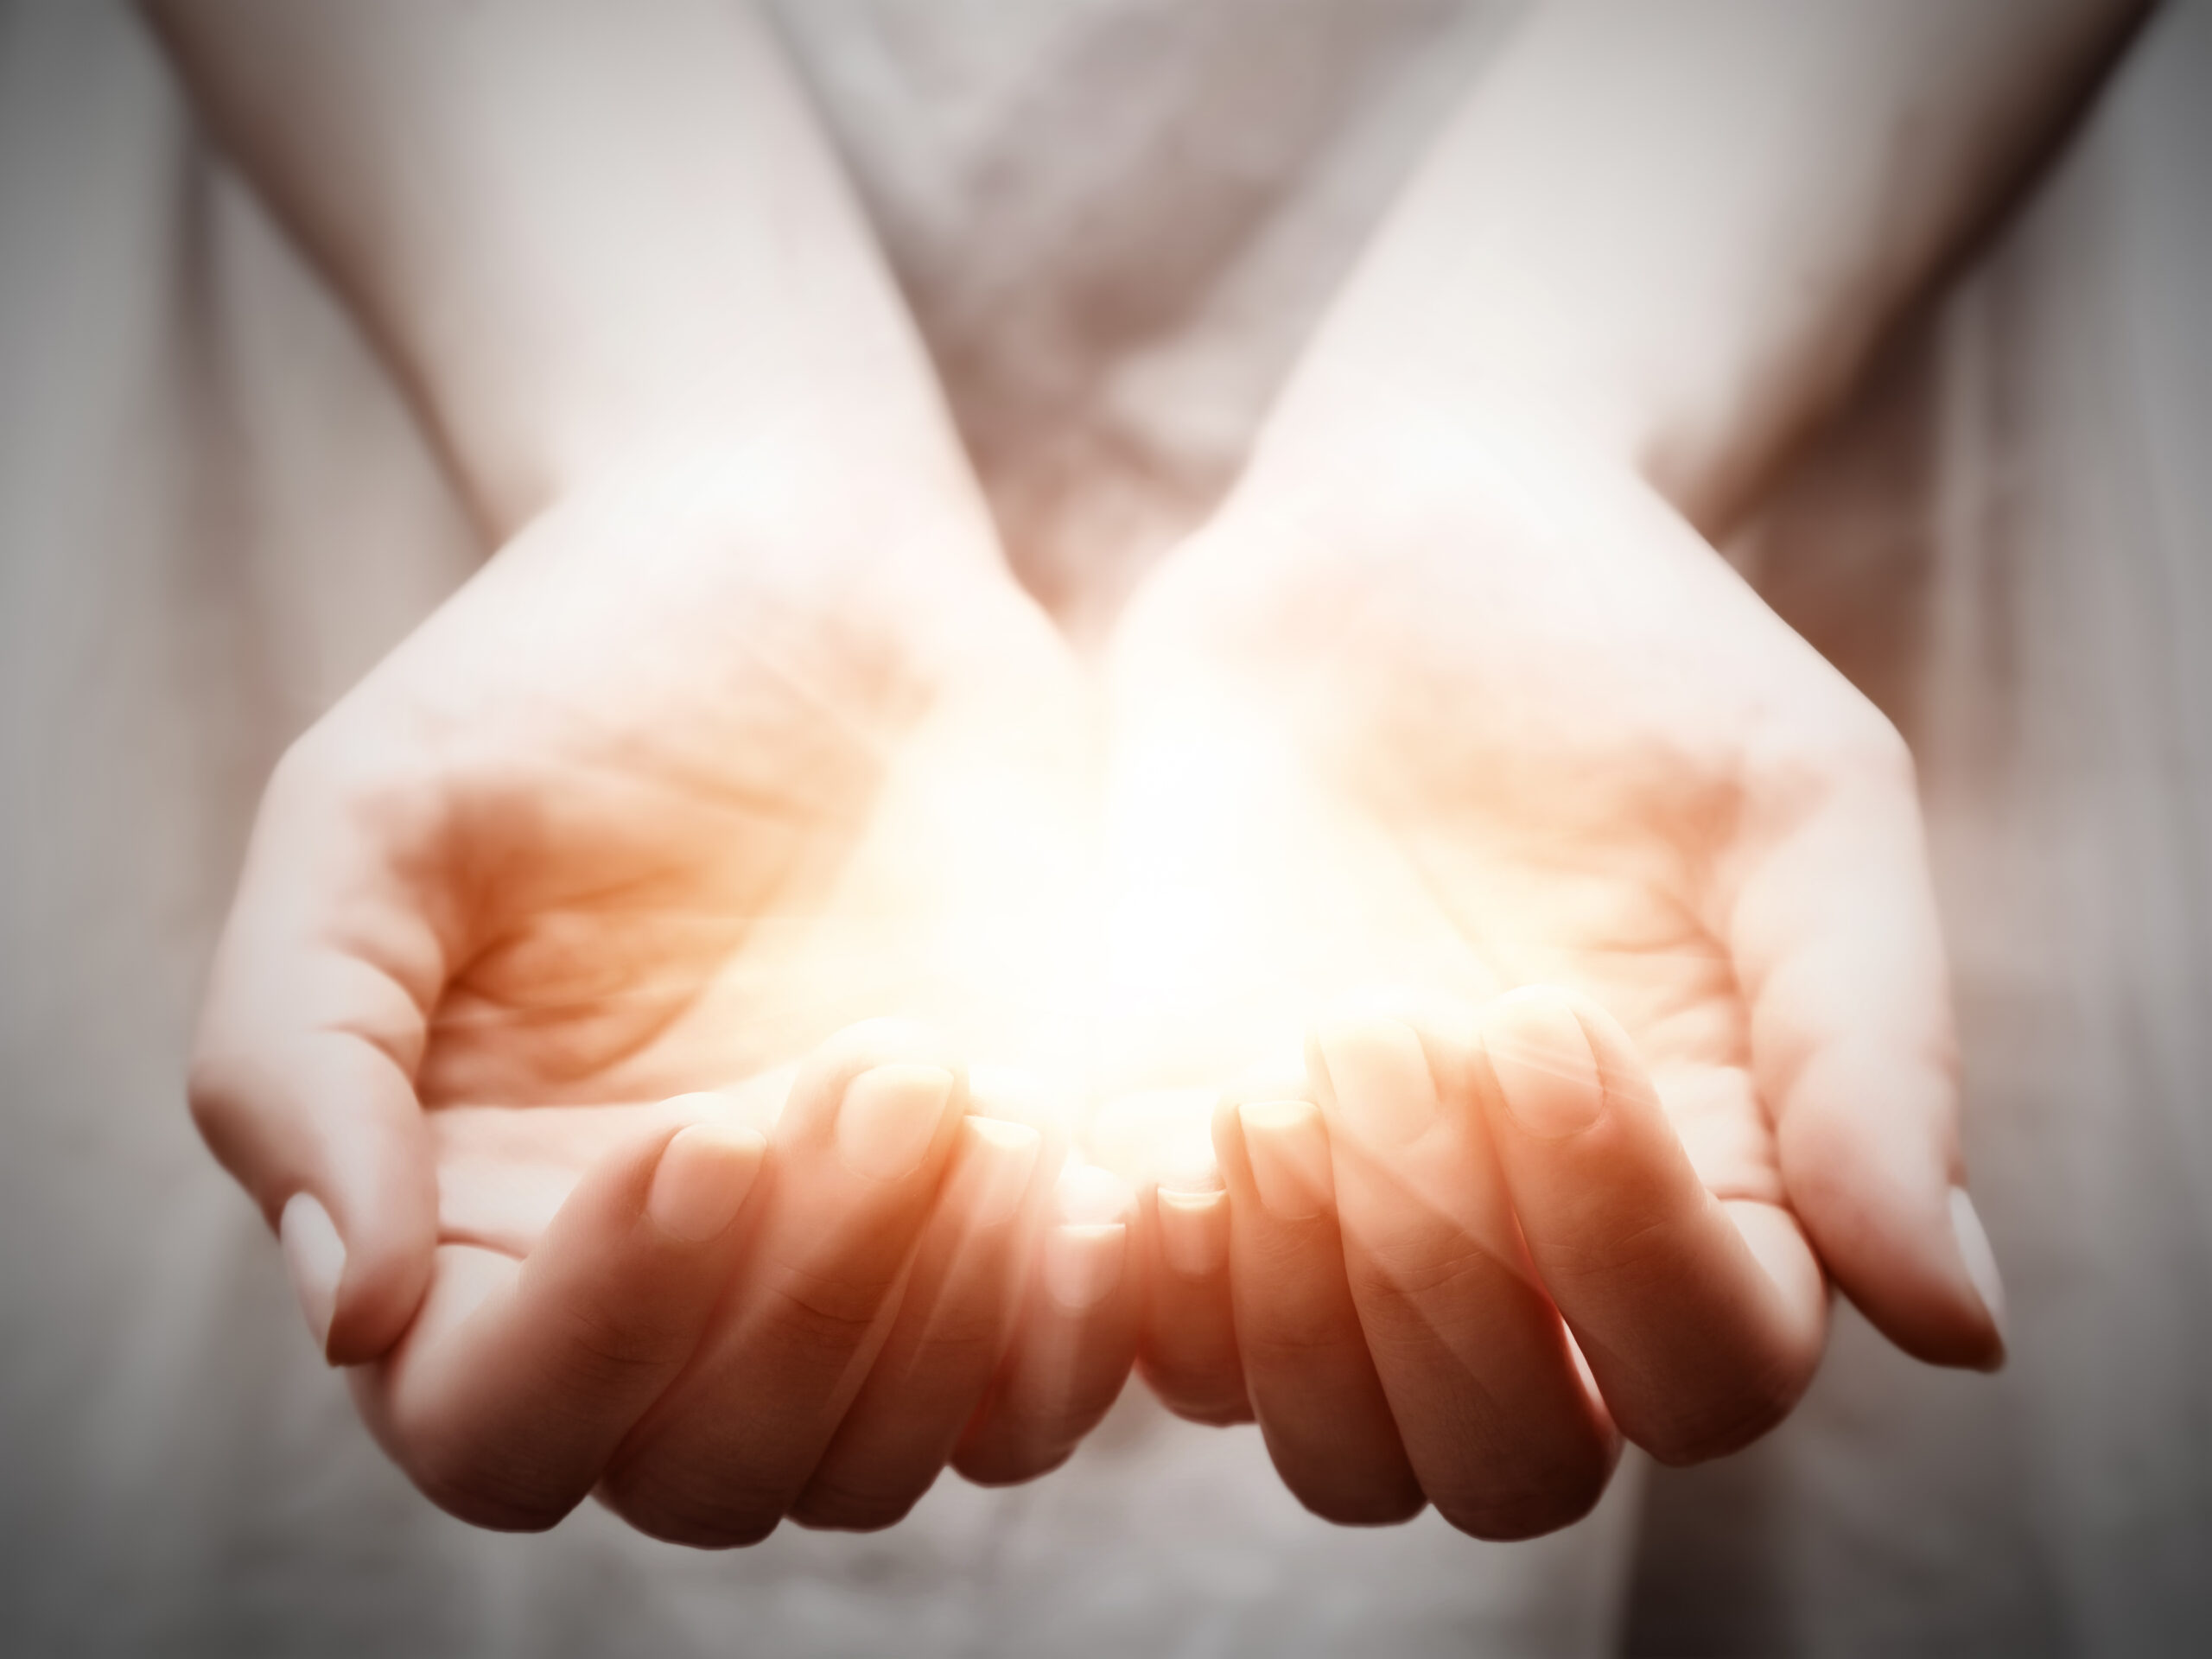 Hands holding light, representing donor offers